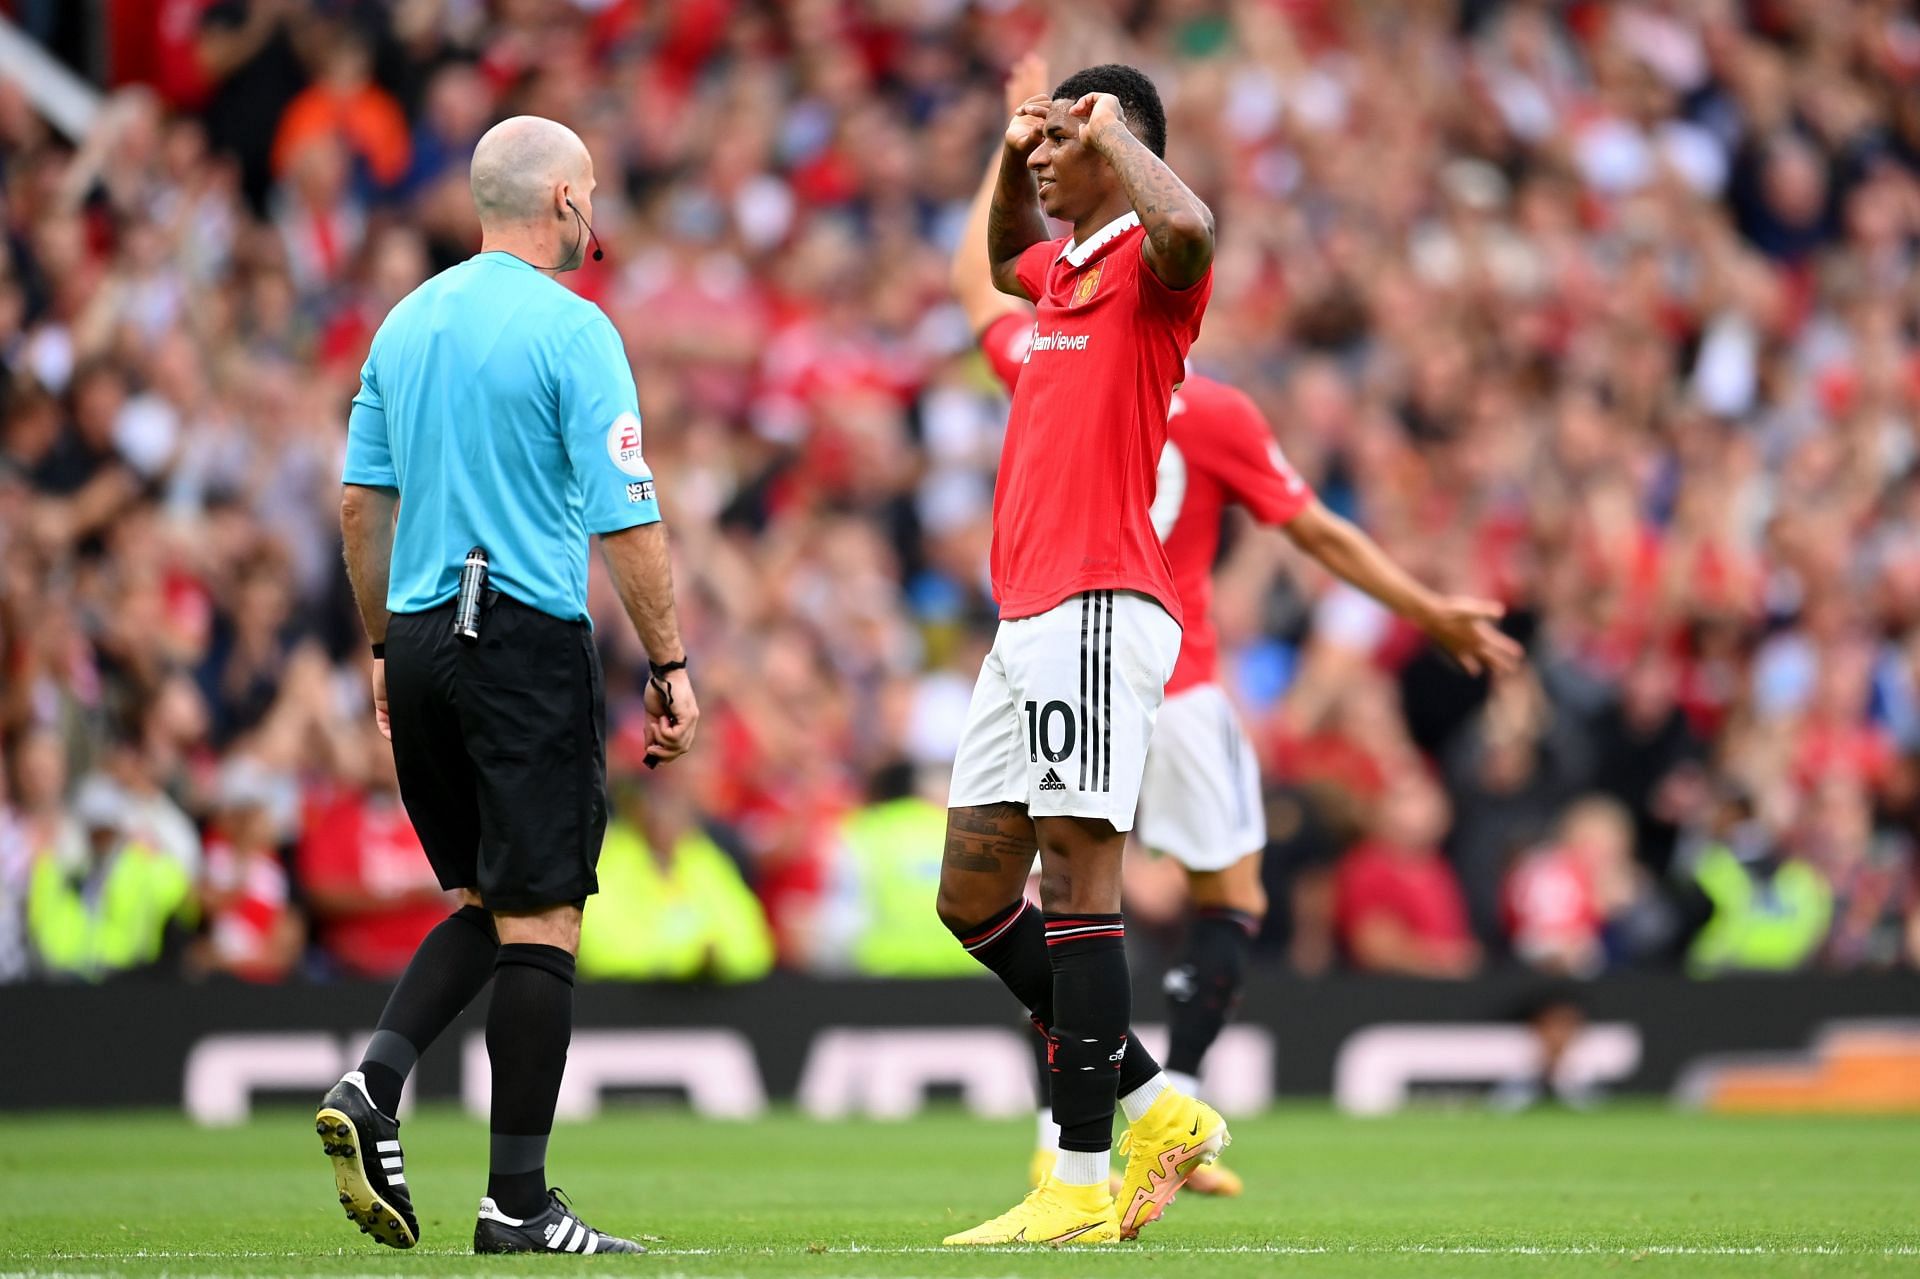 Rashford's contract expires in seven months